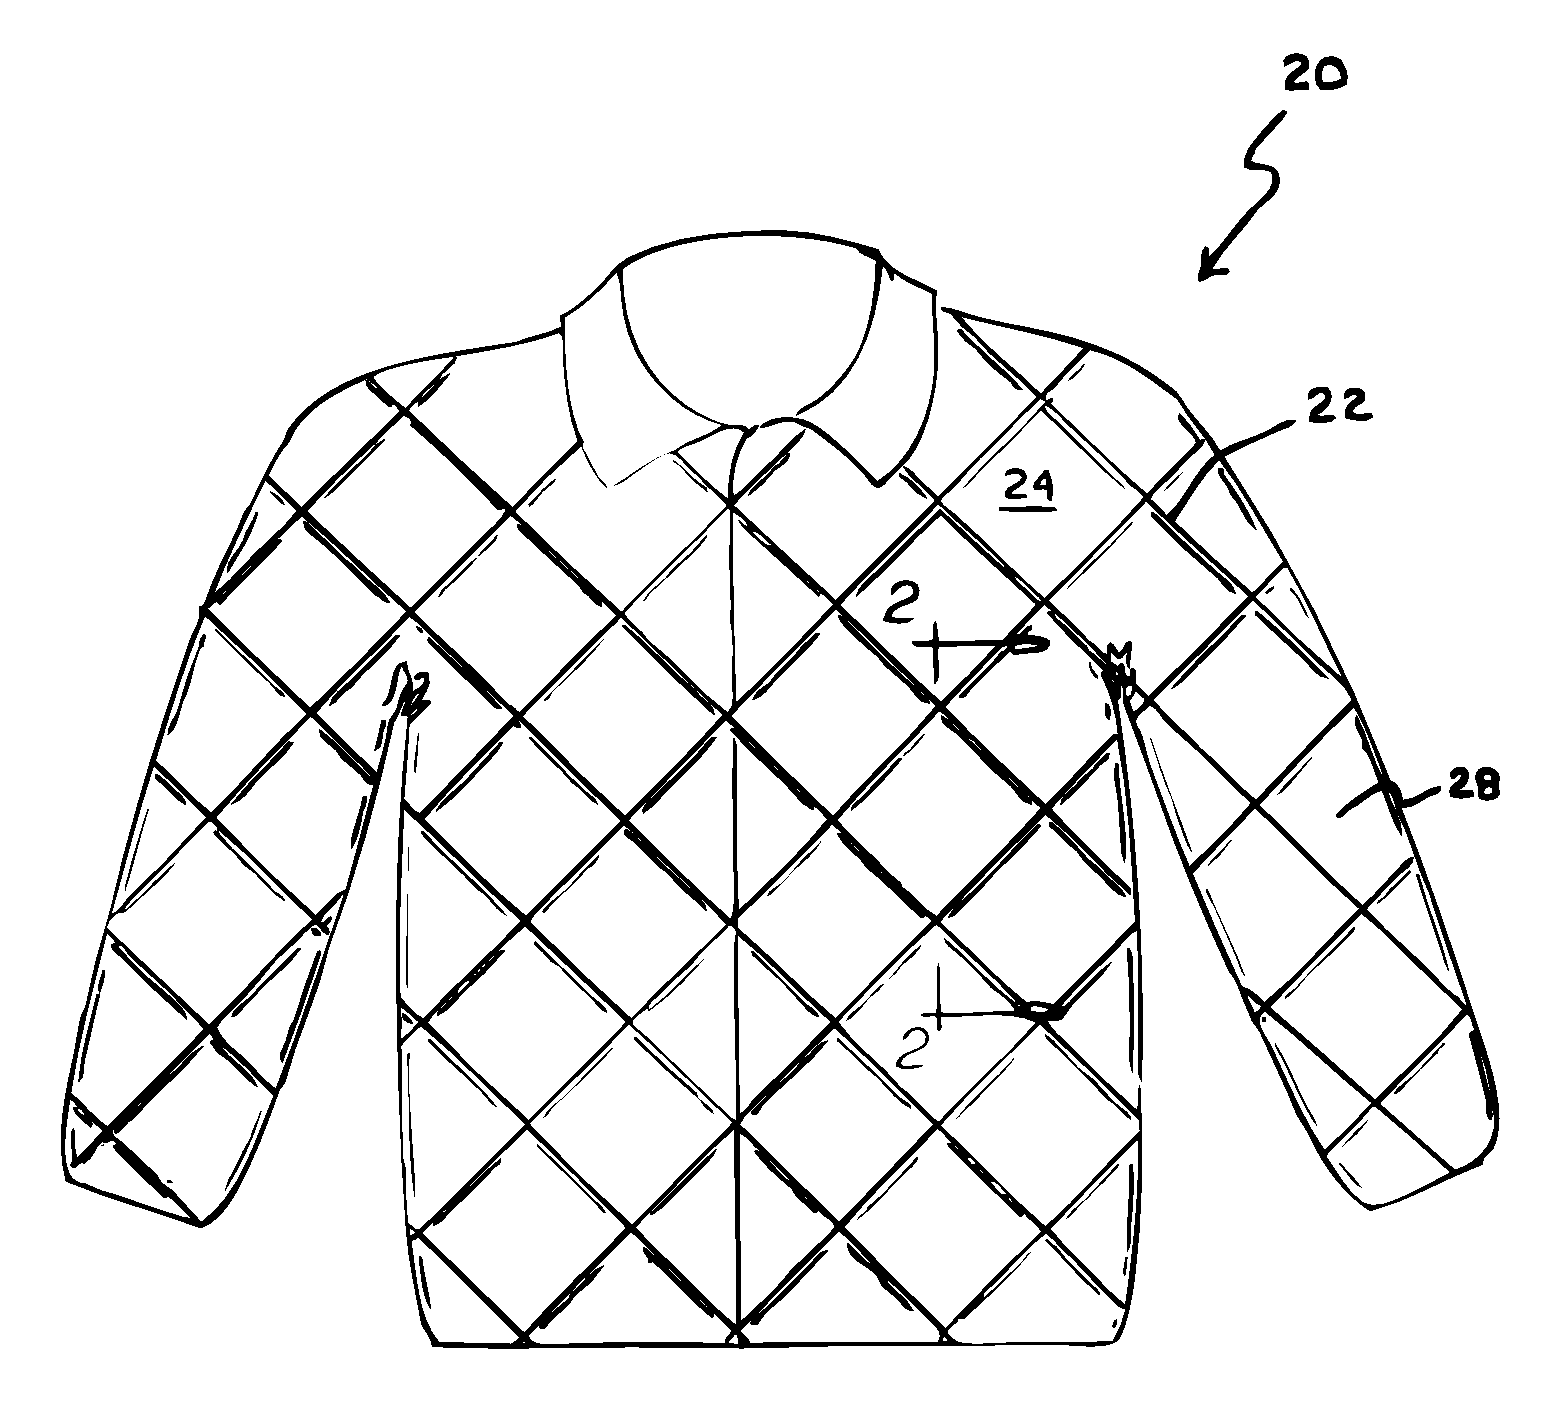 Quilted cold-weather garment with a substantially uncompressed interior foam layer